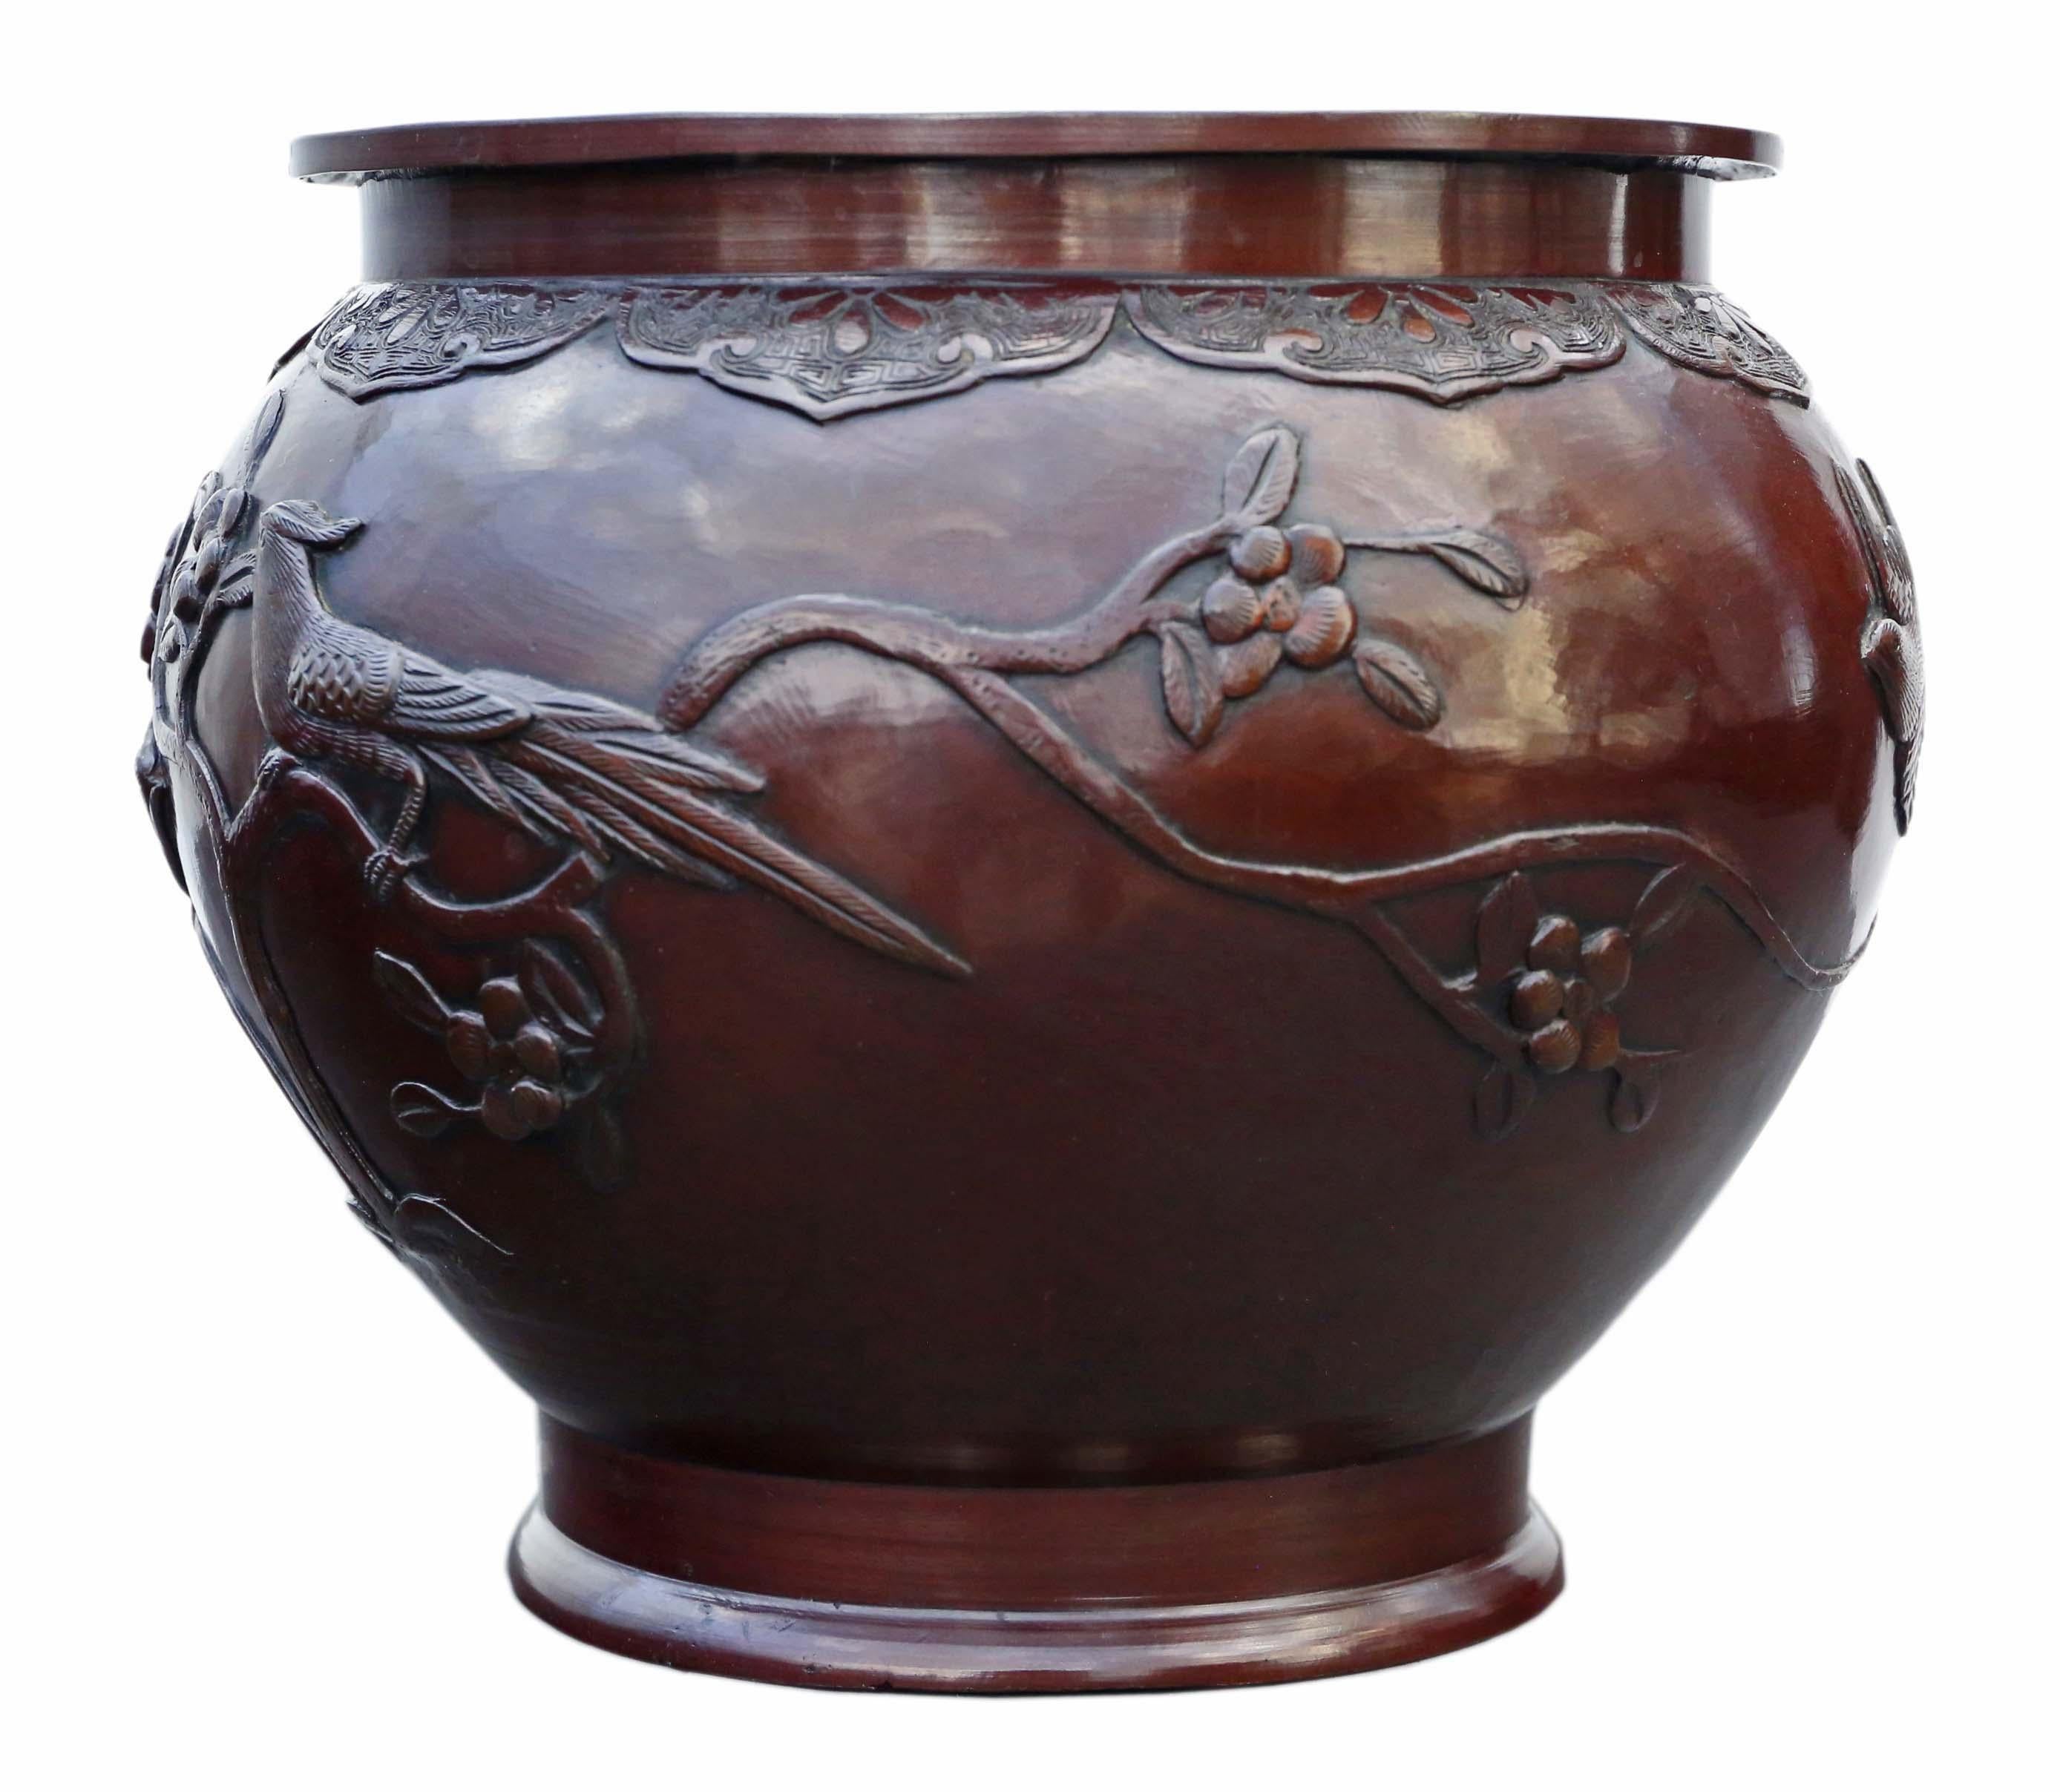 Antique large fine quality Oriental Japanese bronze Jardinière planter bowl censor Meiji Period early 20th Century.

Would look amazing in the right location and make a fabulous centre piece. Great colour and patina.

Overall maximum dimensions: